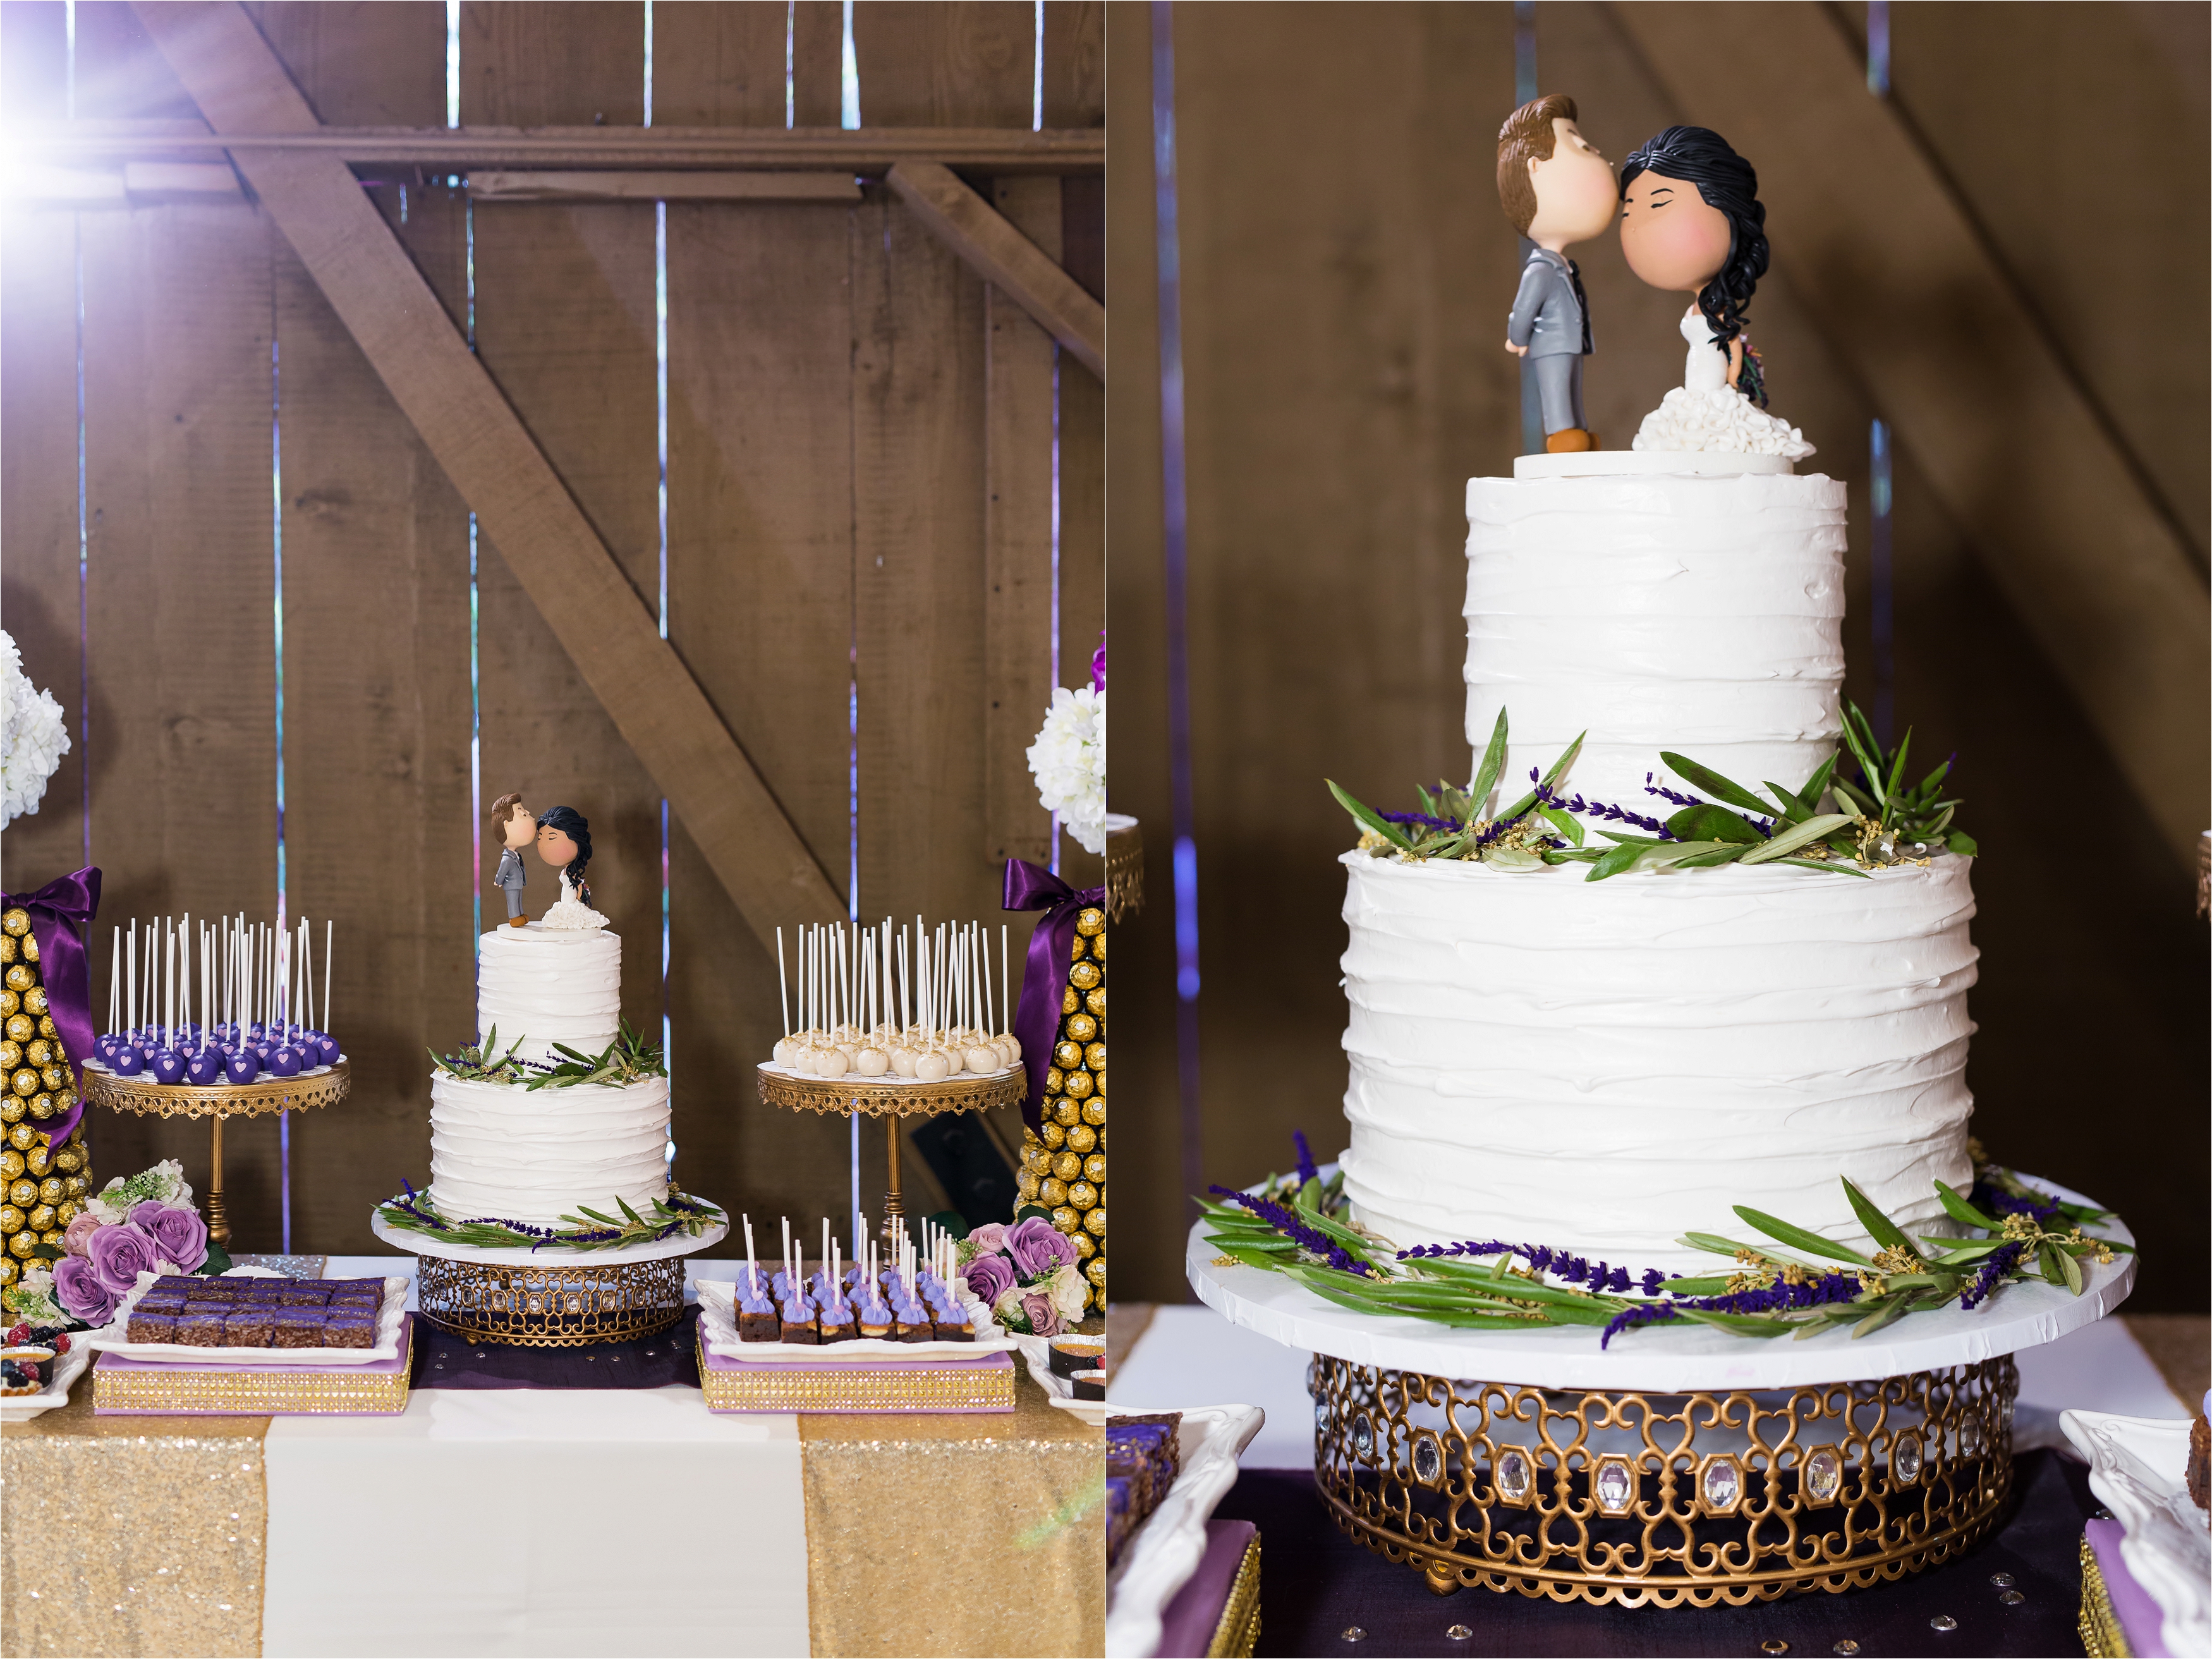 White tiered wedding cake with cute topper